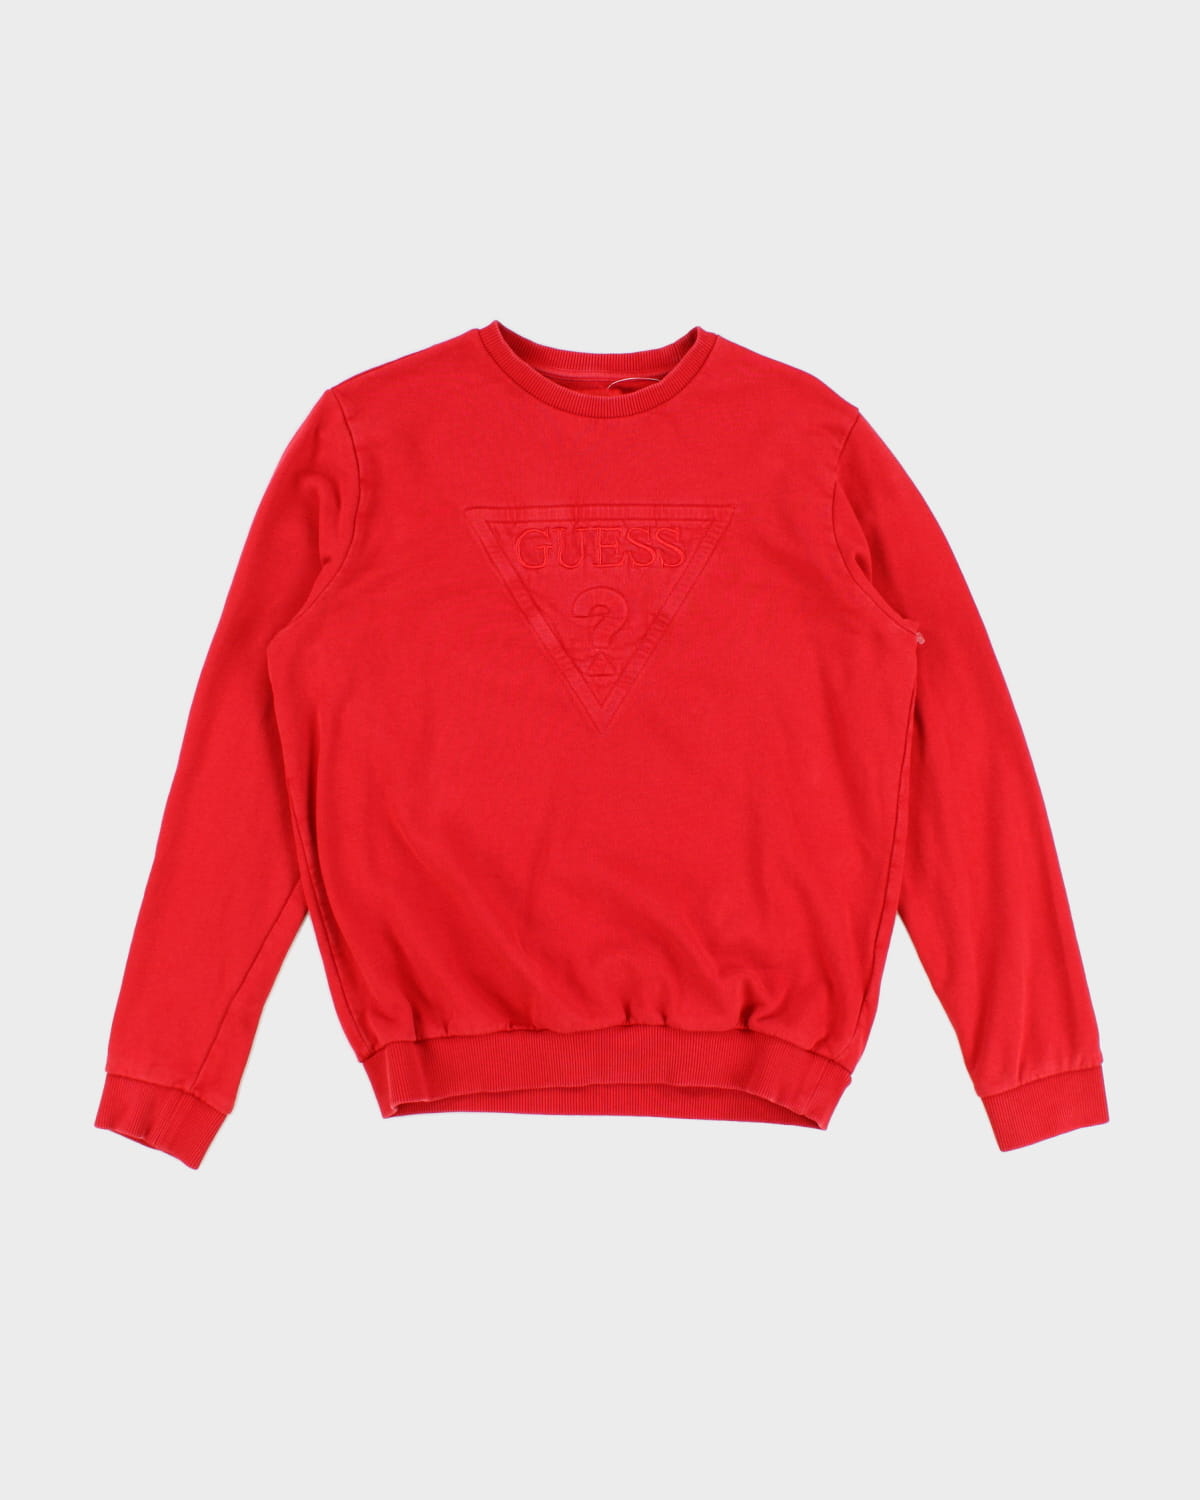 Guess Embroidered Sweatshirt - S – Rokit